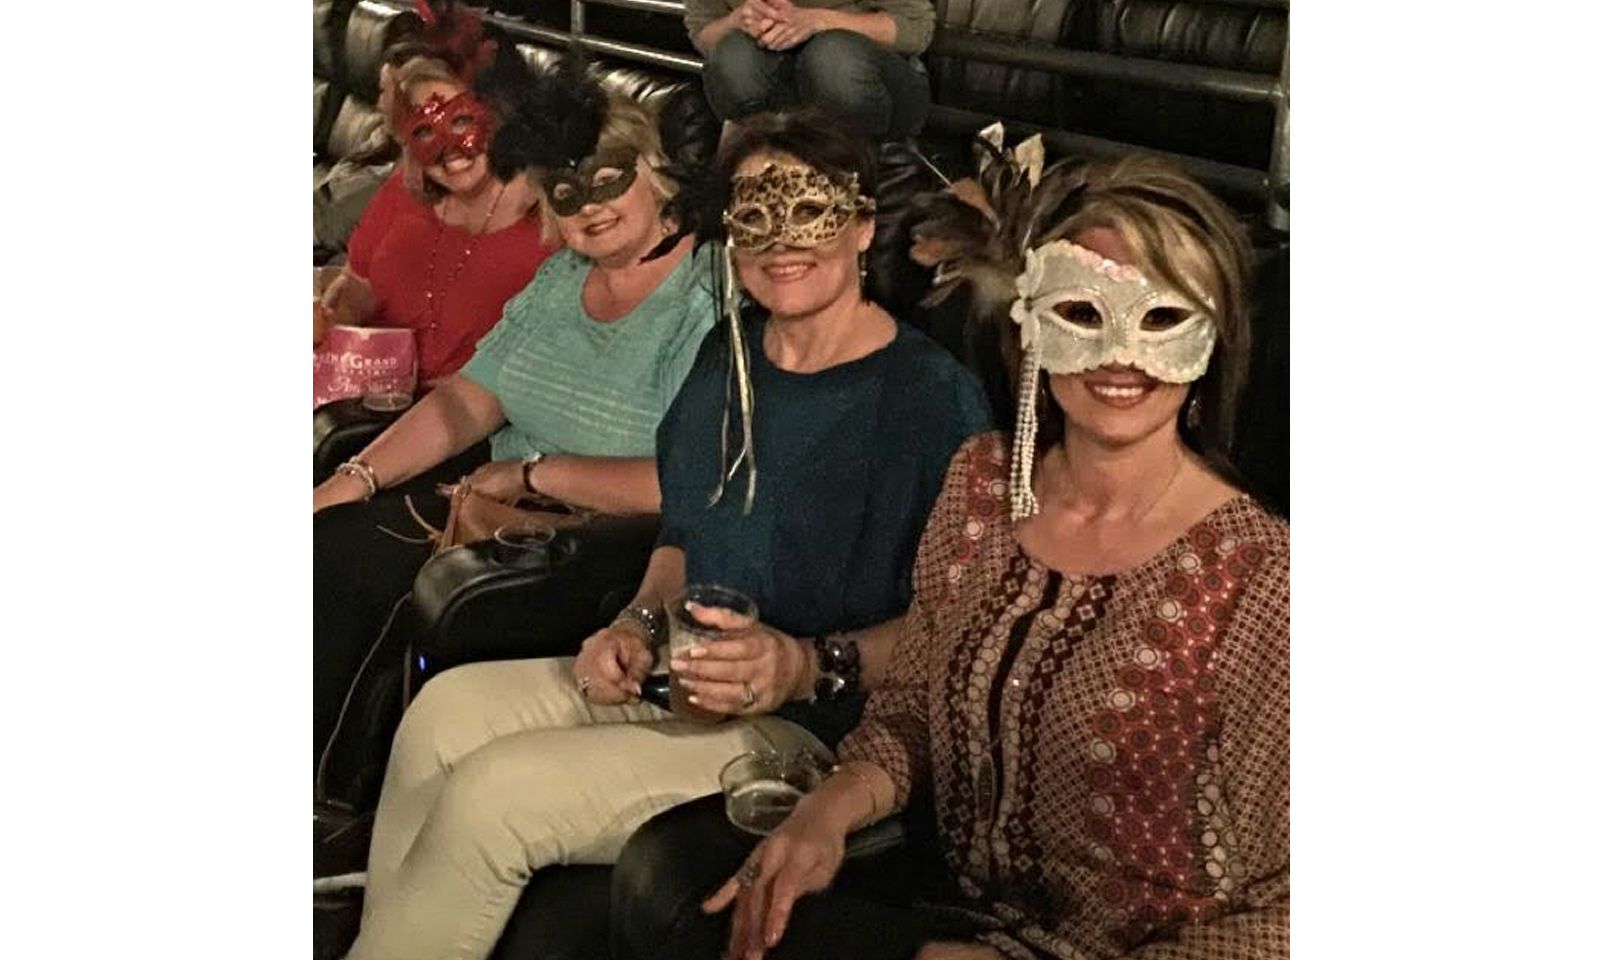 Pepper’s Parties Hosts Private ‘Fifty Shades Darker’ Screening for Customers